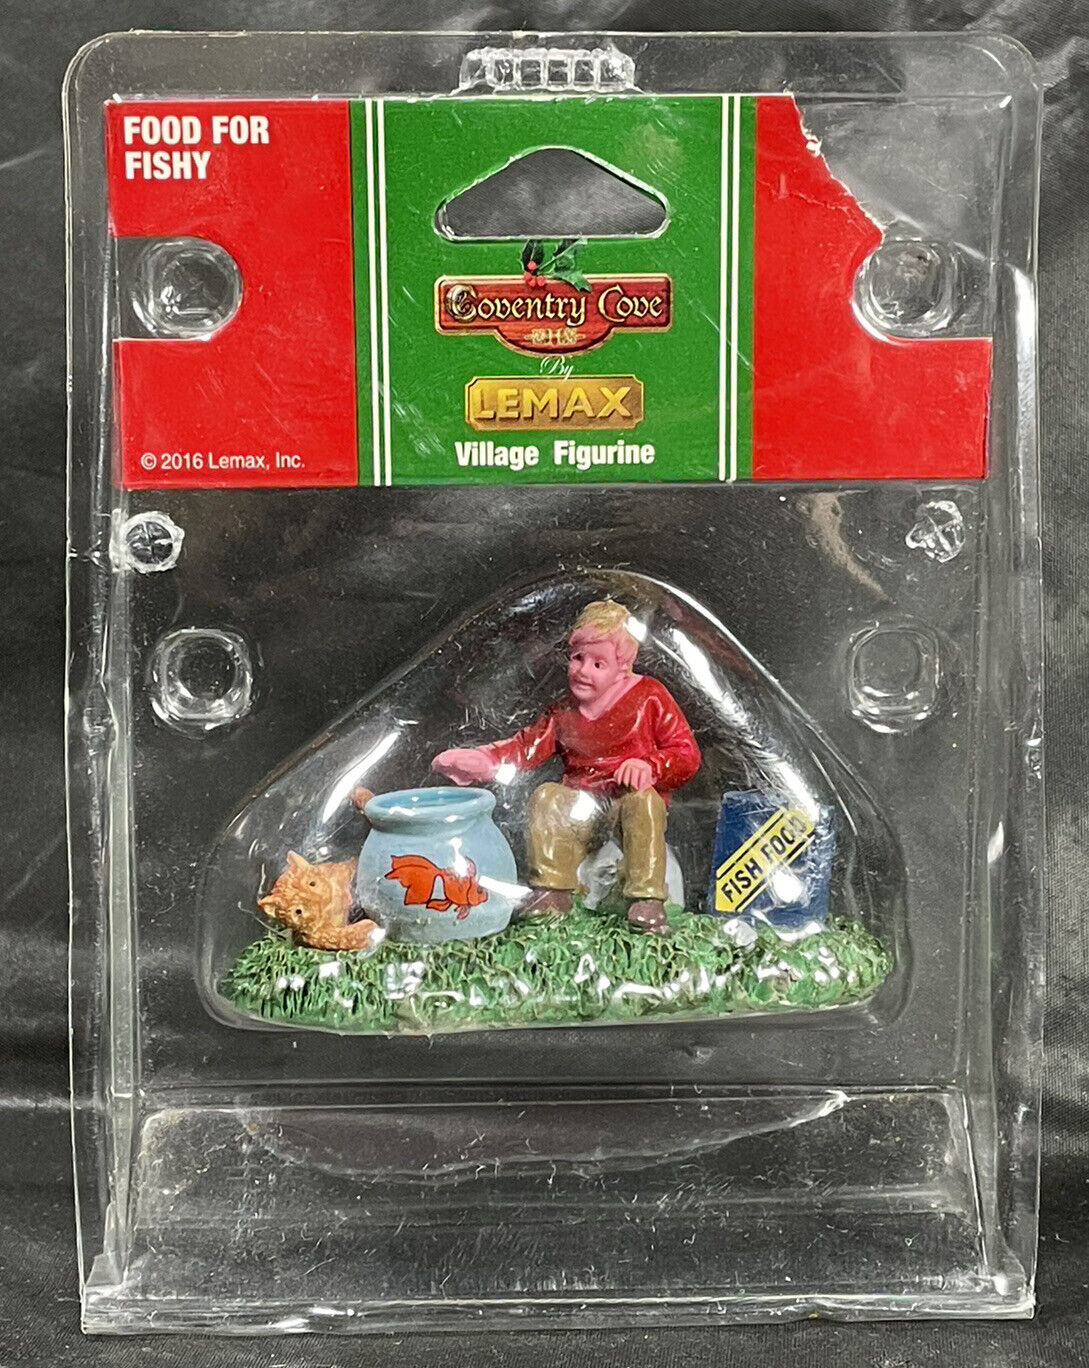 LEMAX Coventry Cove Food for Fishy Christmas Village Figure 62460 Cat Boy 2016